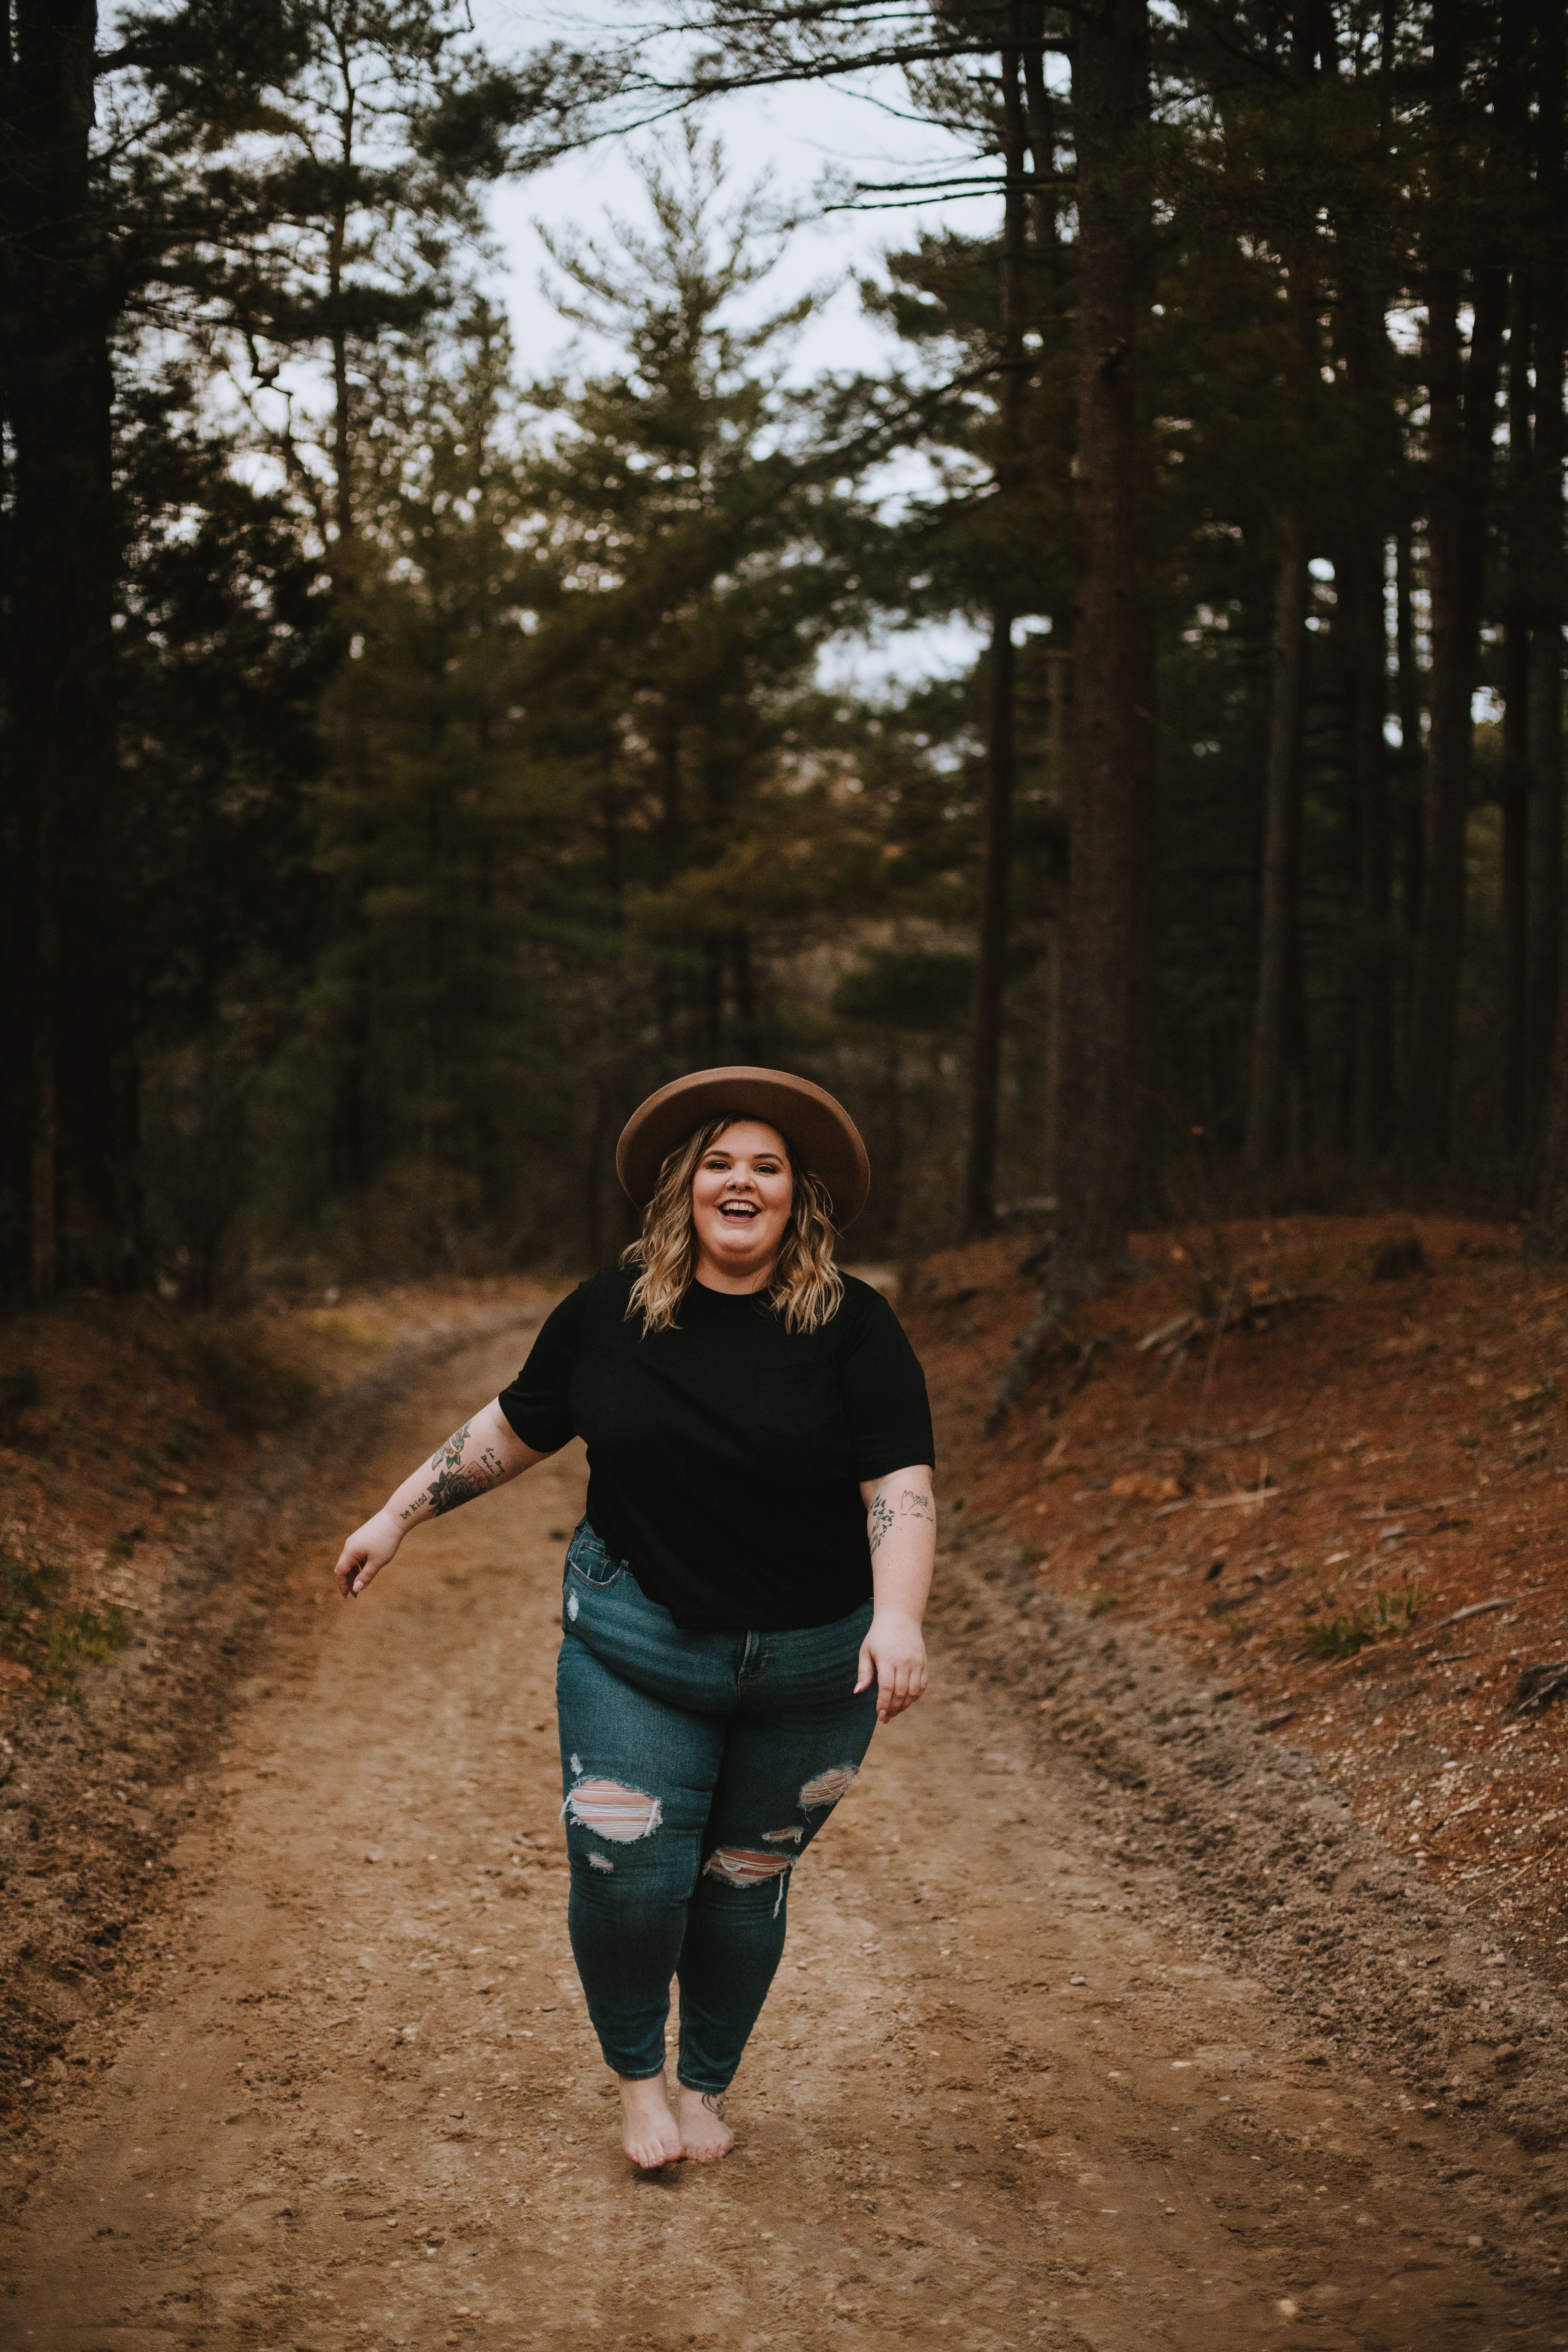 A fat blond caucasian woman is walking in a forest. She has bare feet and is wearing blue jeans, a  black t-shirt and a brown hat. She has a big smile on her face.